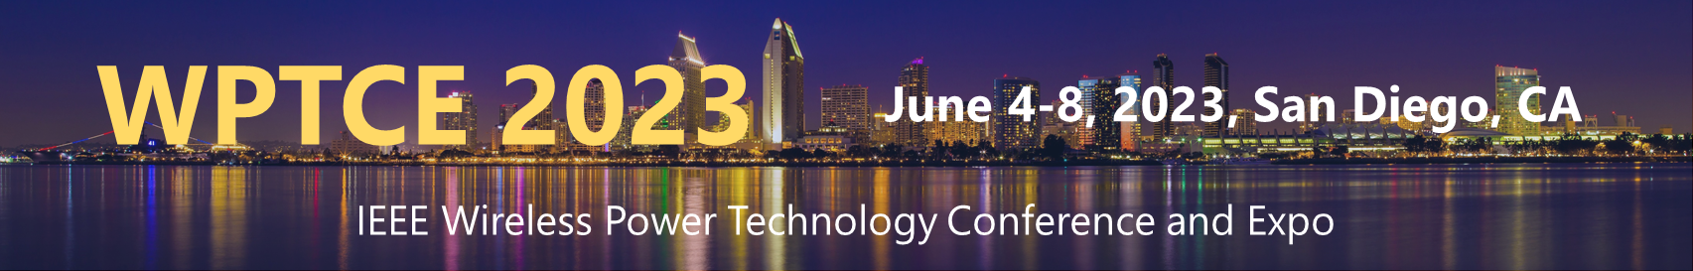 IEEE Wireless Power Technology Conference and Expo (WPTCE 2023), June 4-8, 2023, San Diego, CA